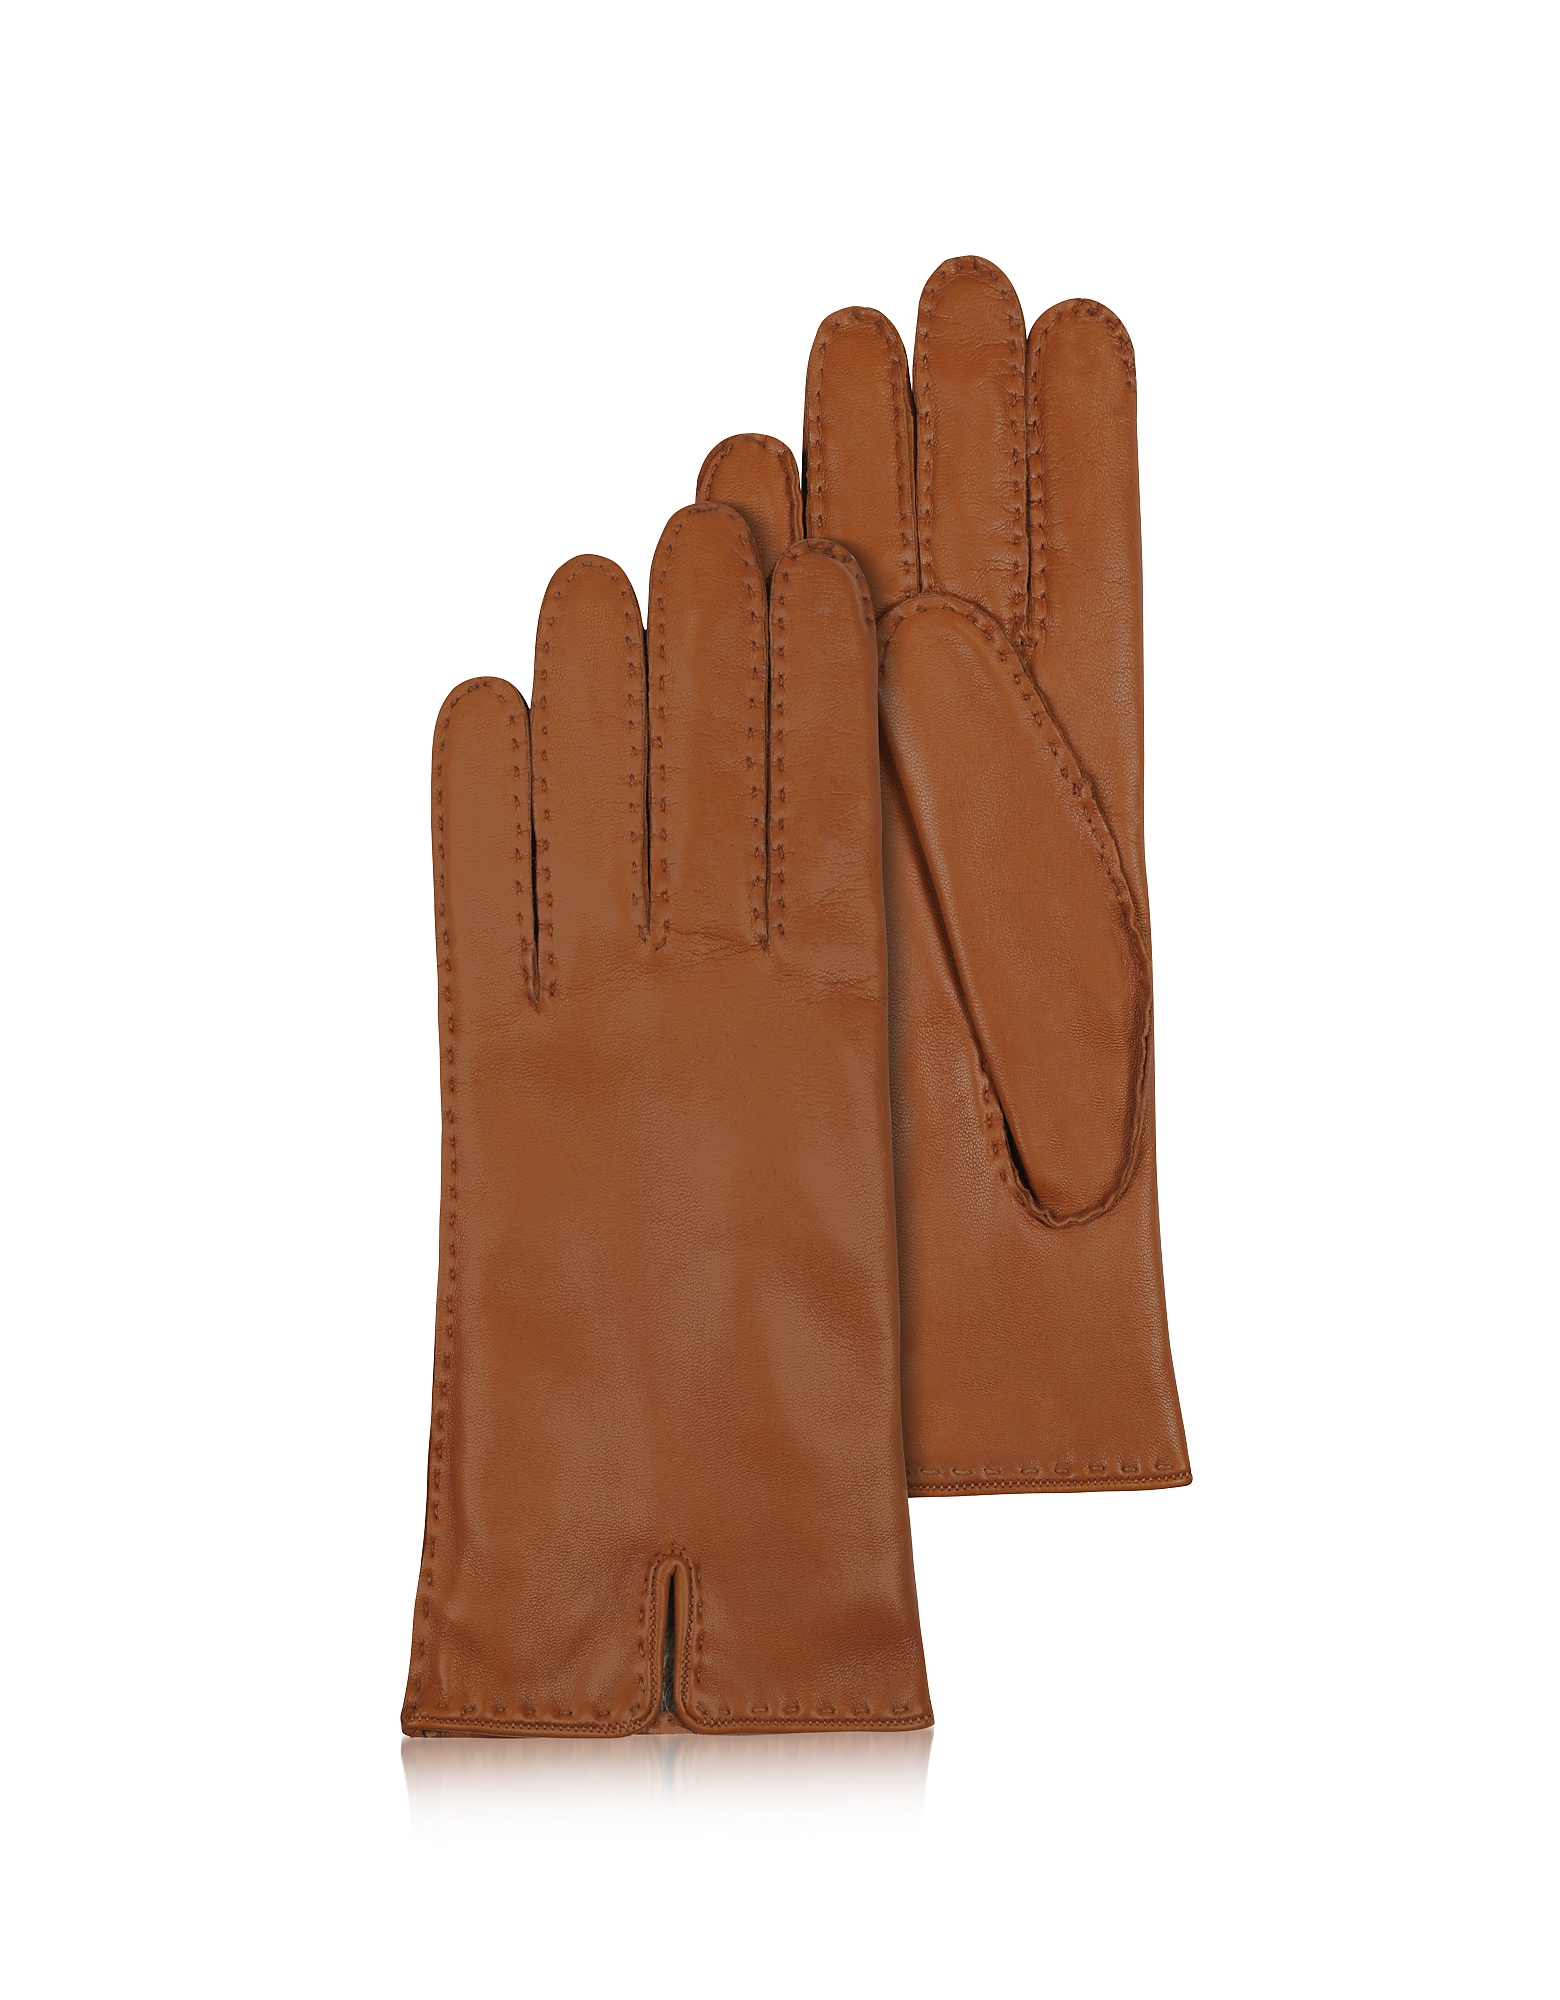 Forzieri Women's Gloves Women's Cashmere Lined Brown Italian Leather Gloves